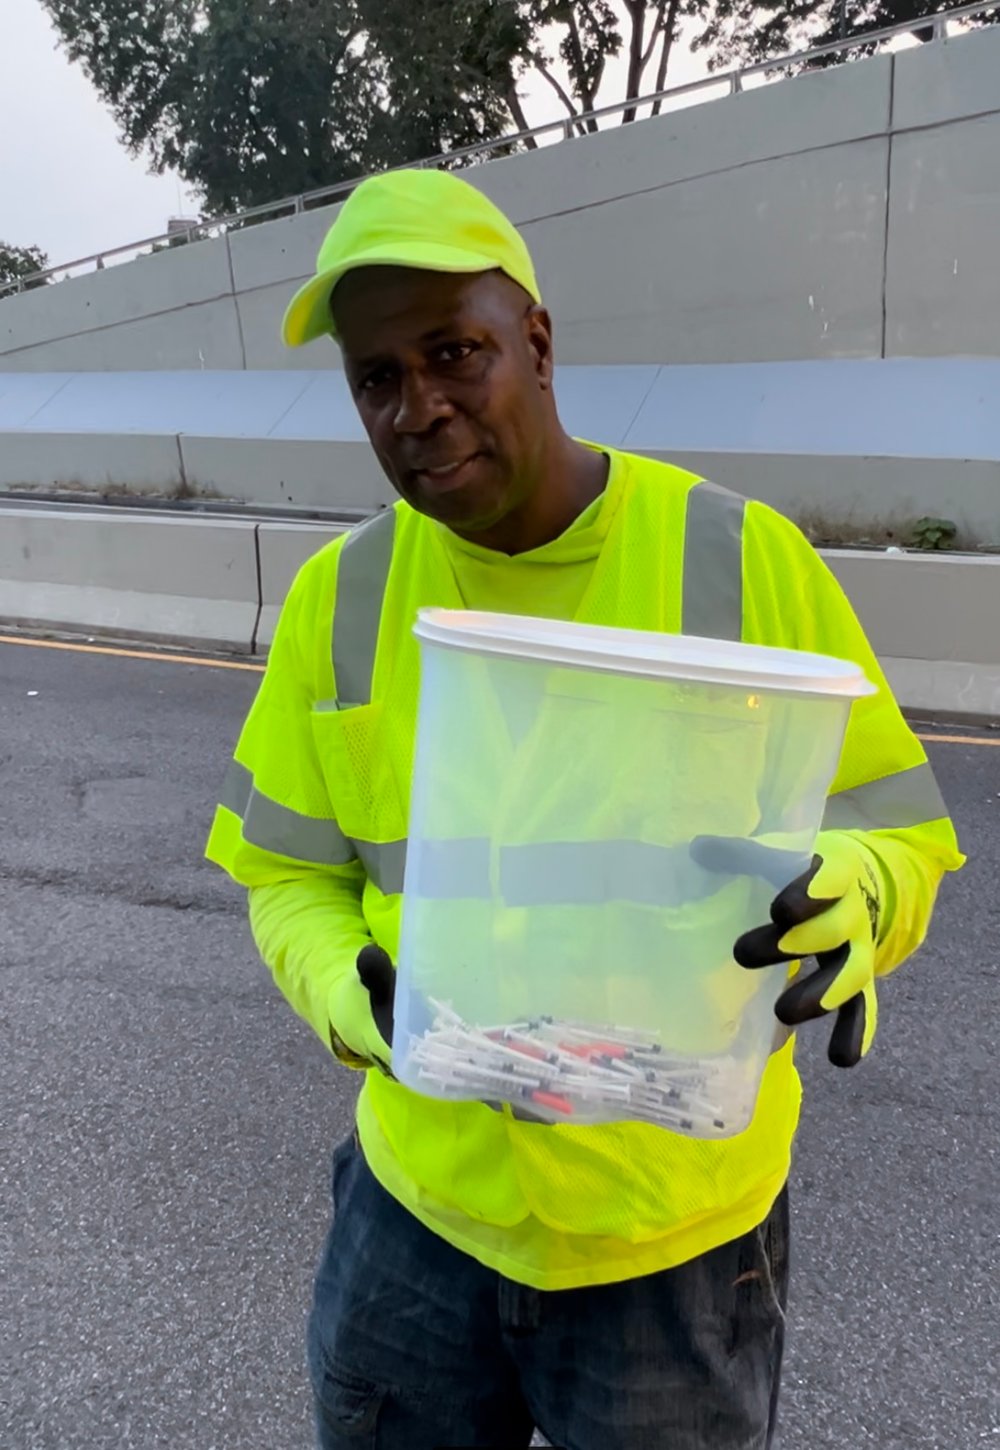 At the Kingsbridge Underpass, a Black man wearing a neon green safety vest and protective gloves holds a case containing used syringes.